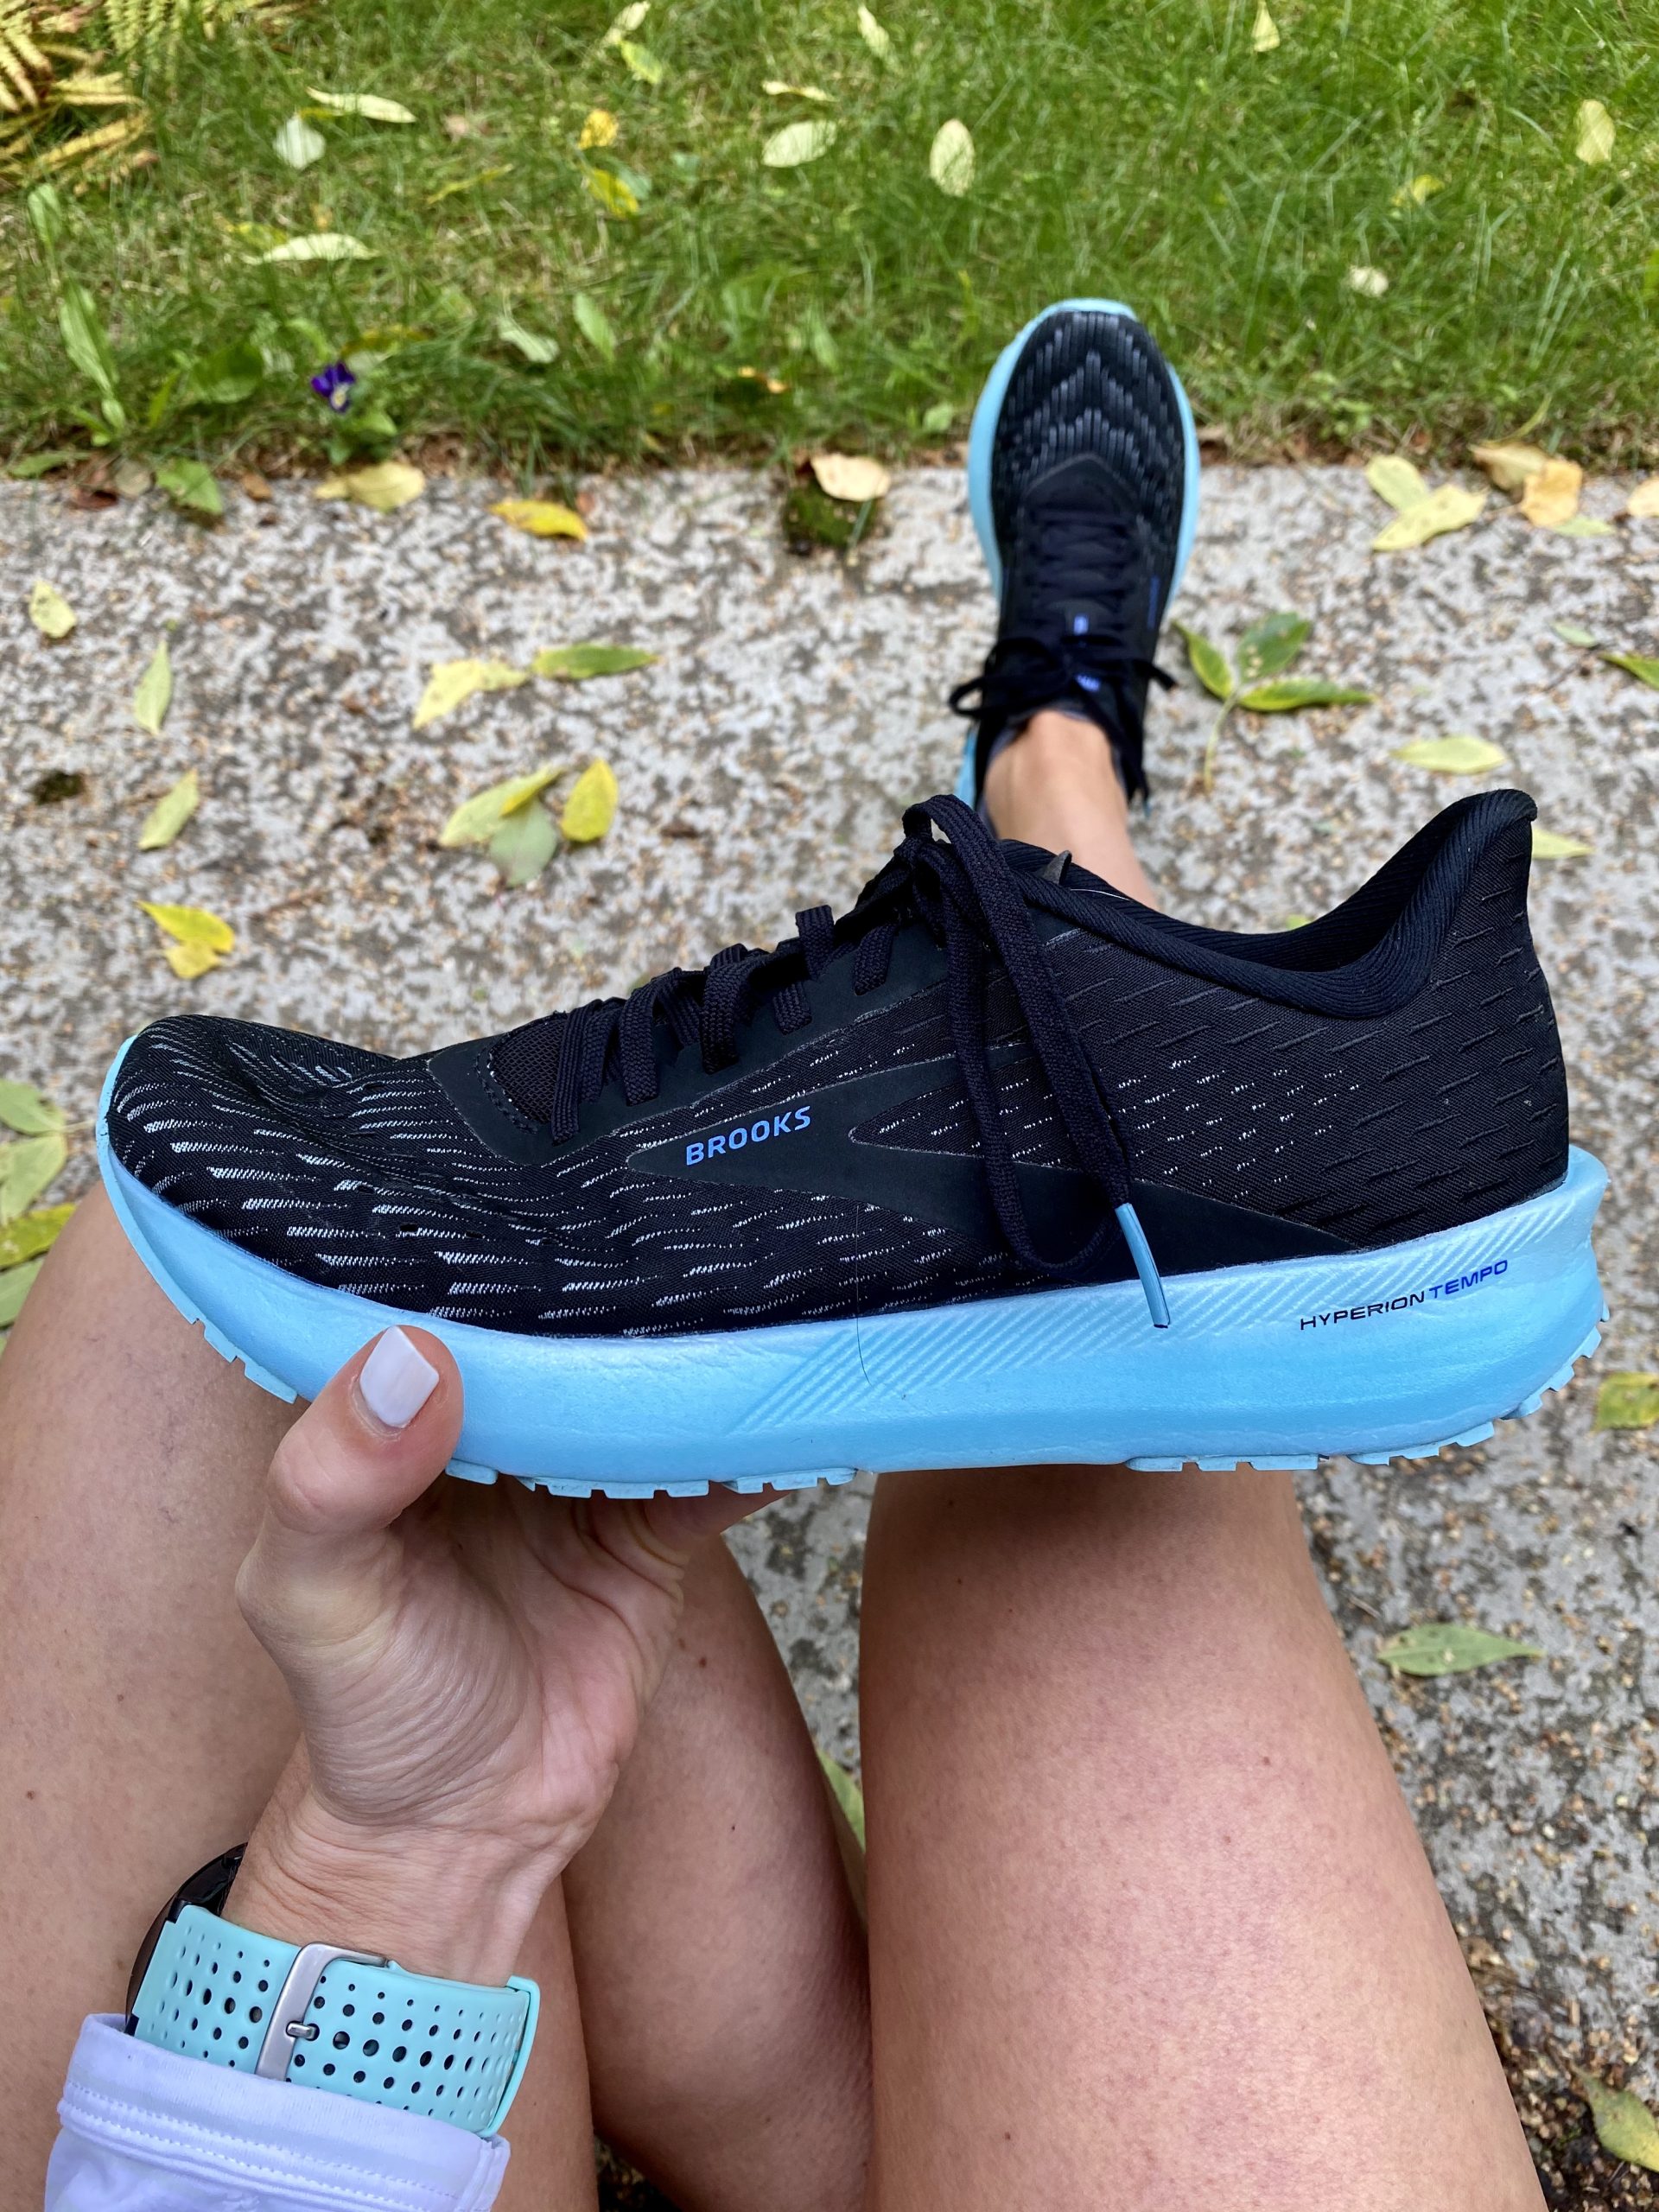 brooks hyperion review